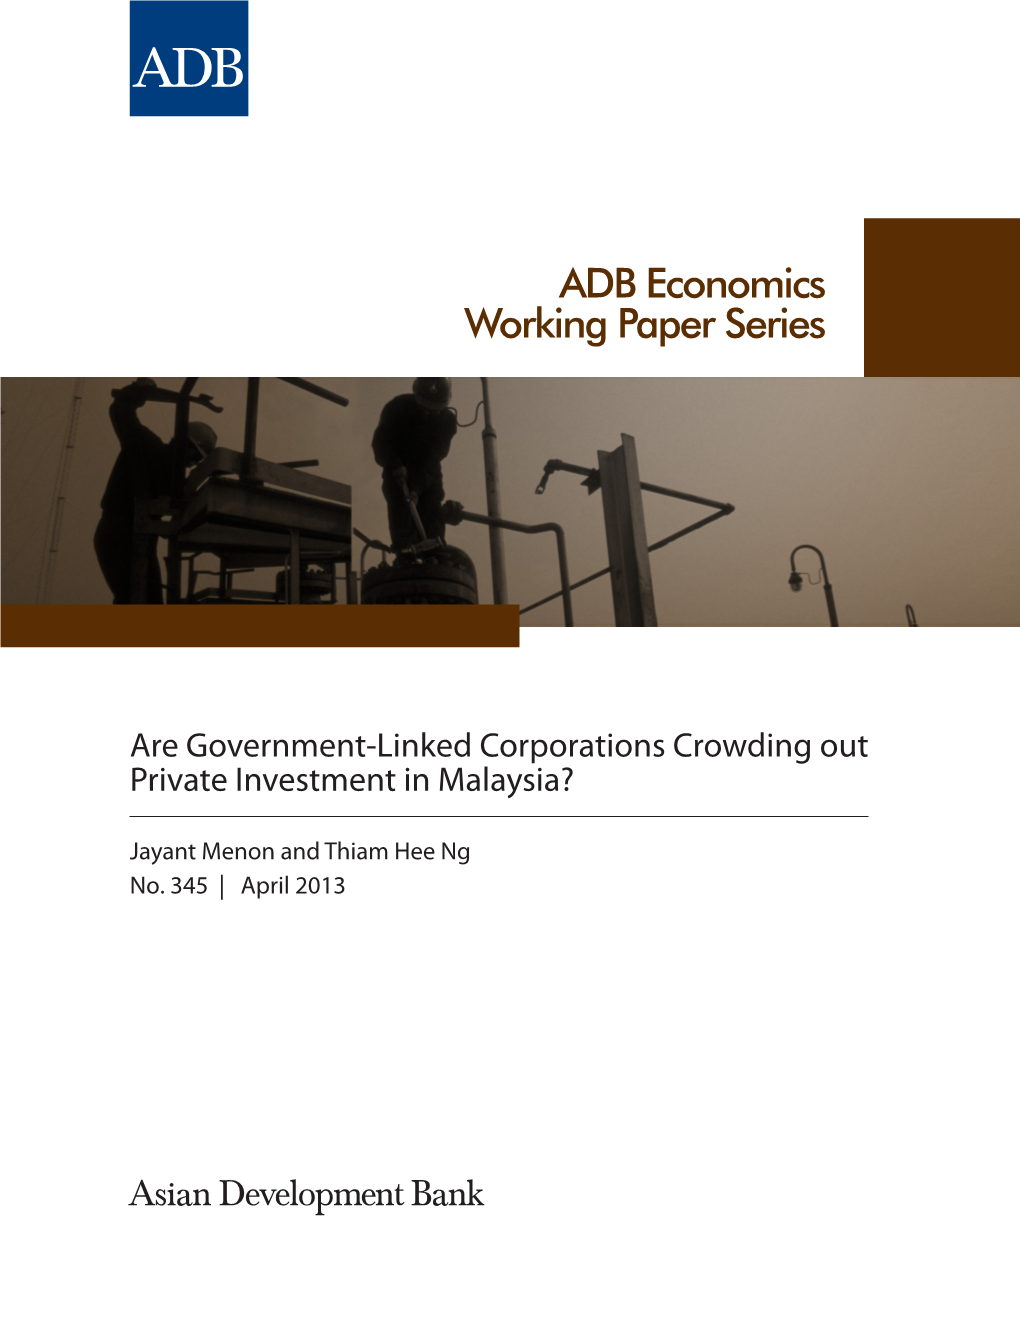 Are Government-Linked Corporations Crowding out Private Investment in Malaysia? Private Investment in Malaysia Never Fully Recovered from the Asian Financial Crisis